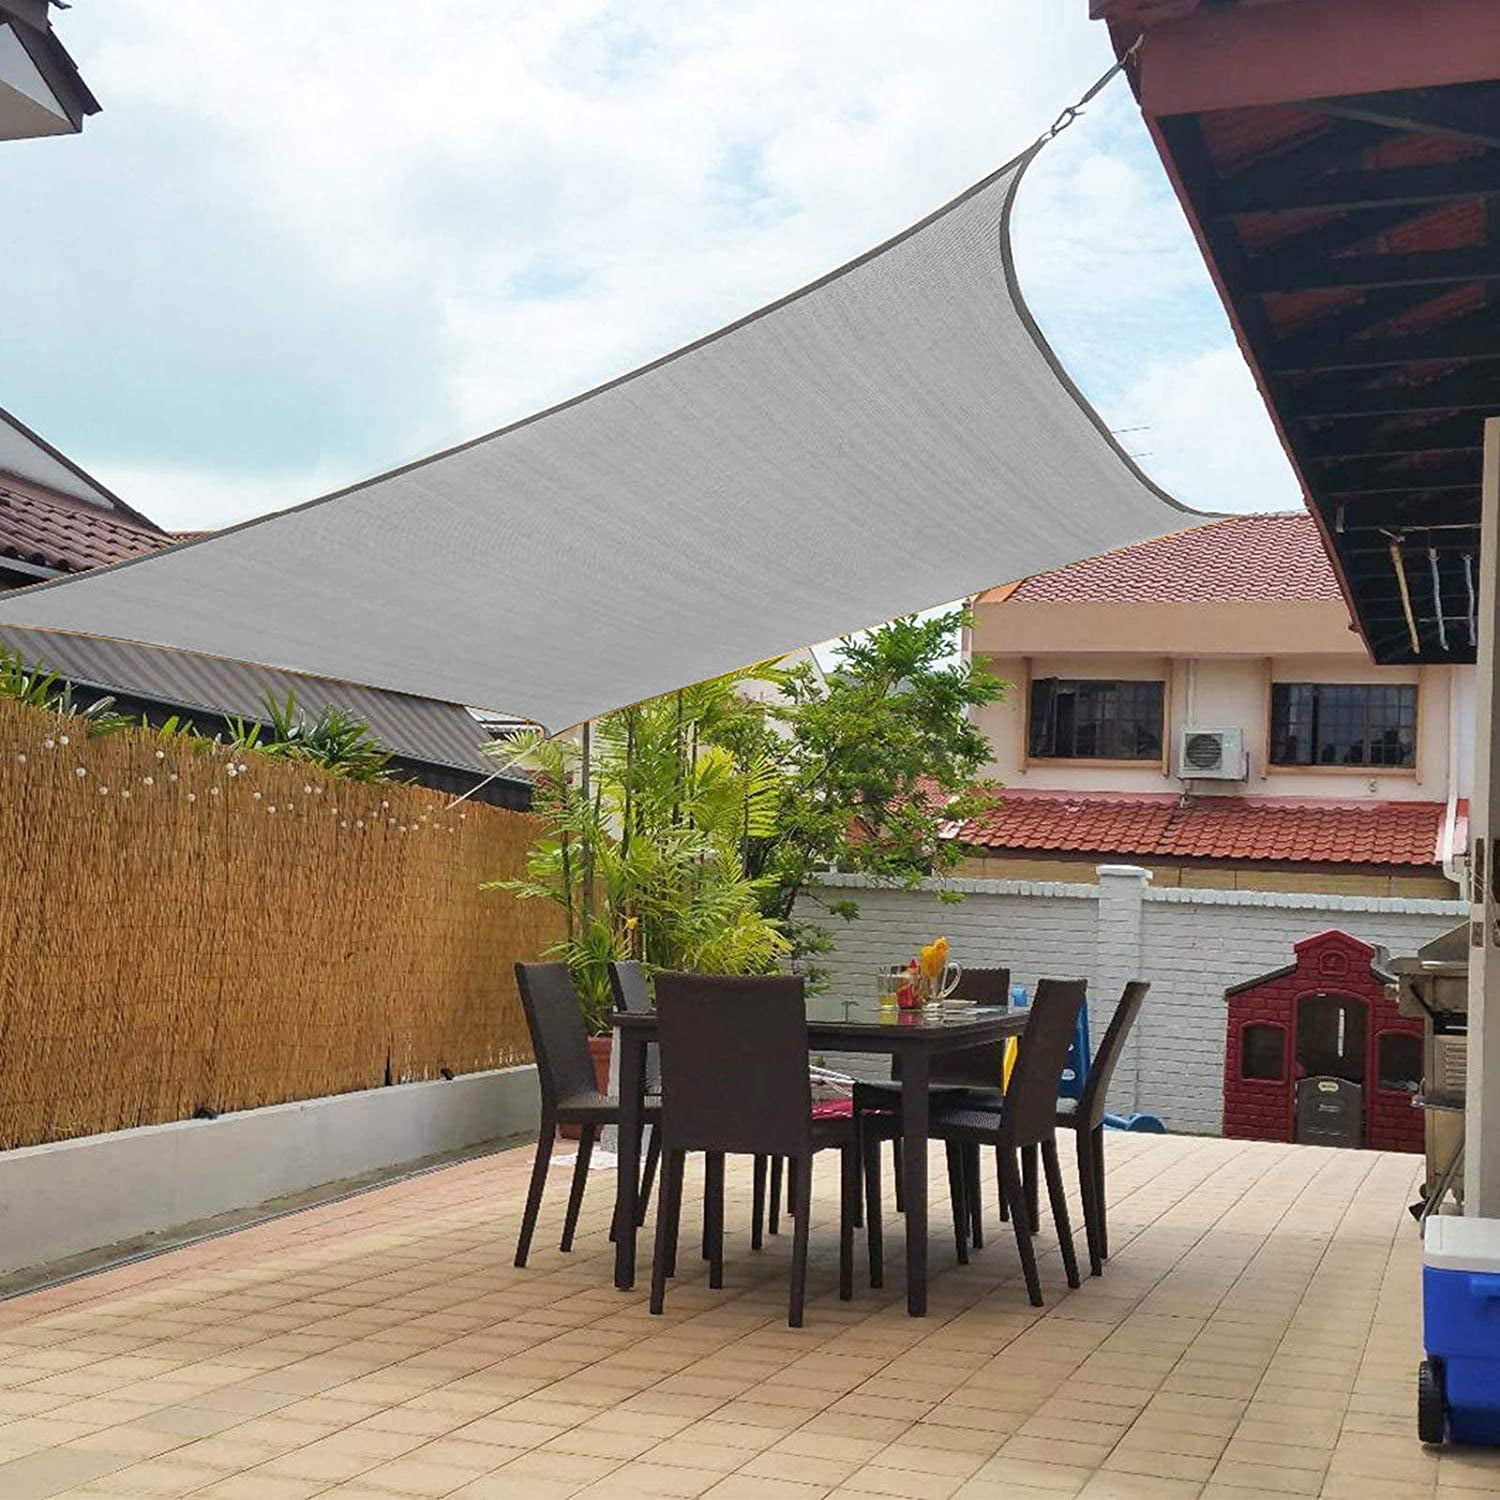 6.5 8 10 11.5" Sun Shade Sail UV Block Canopy Patio Pool Awning Cover Outdoor 